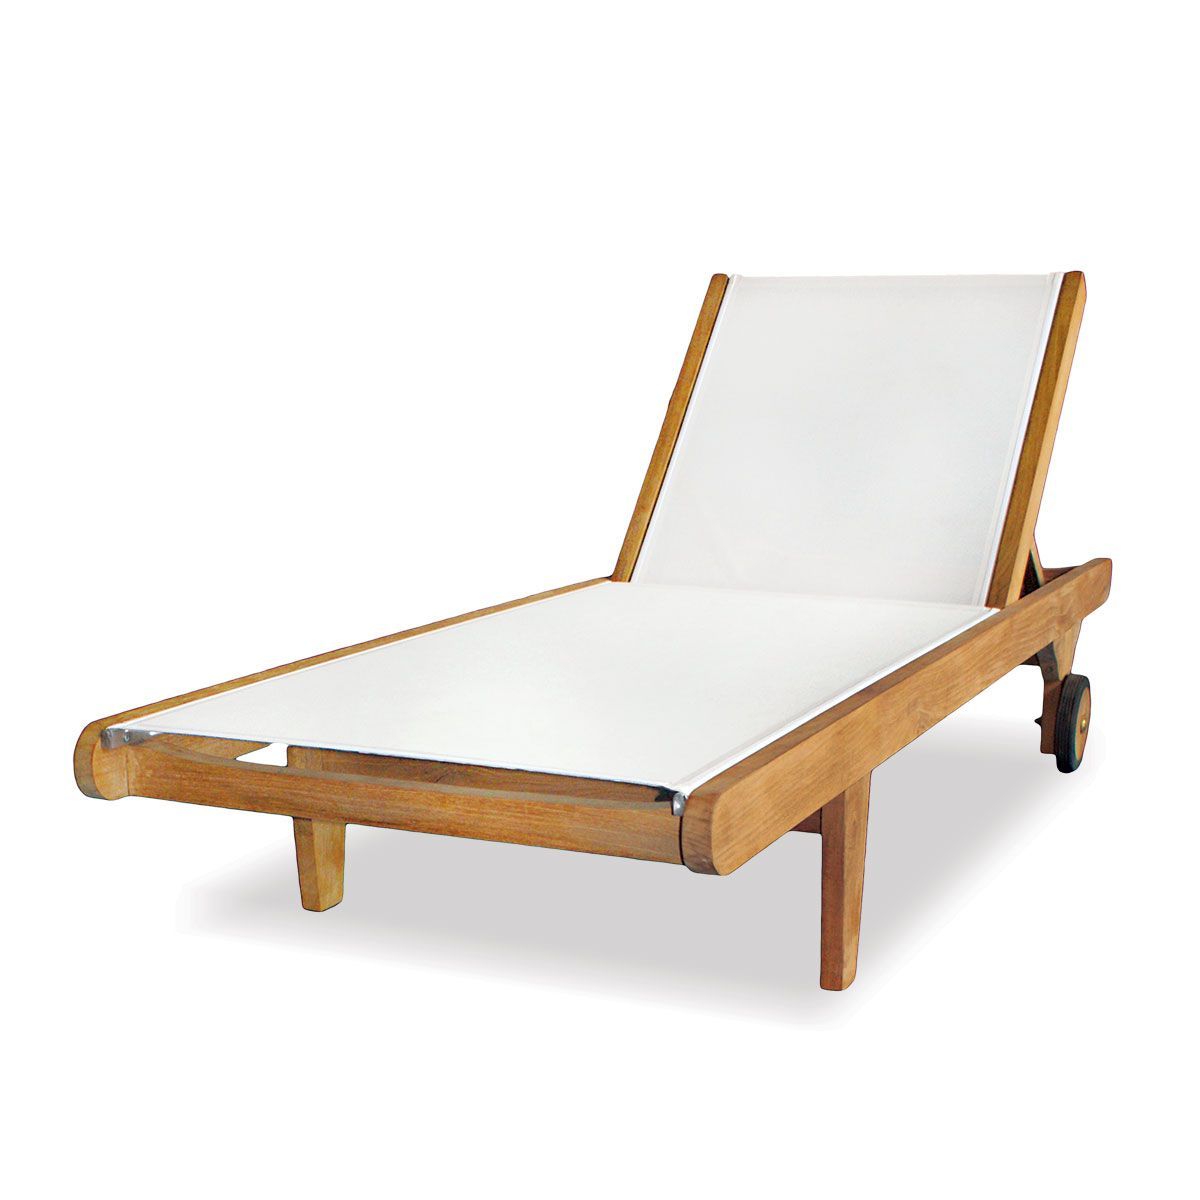 Teak Chaise Lounge With Outdoor Sling (View 12 of 25)